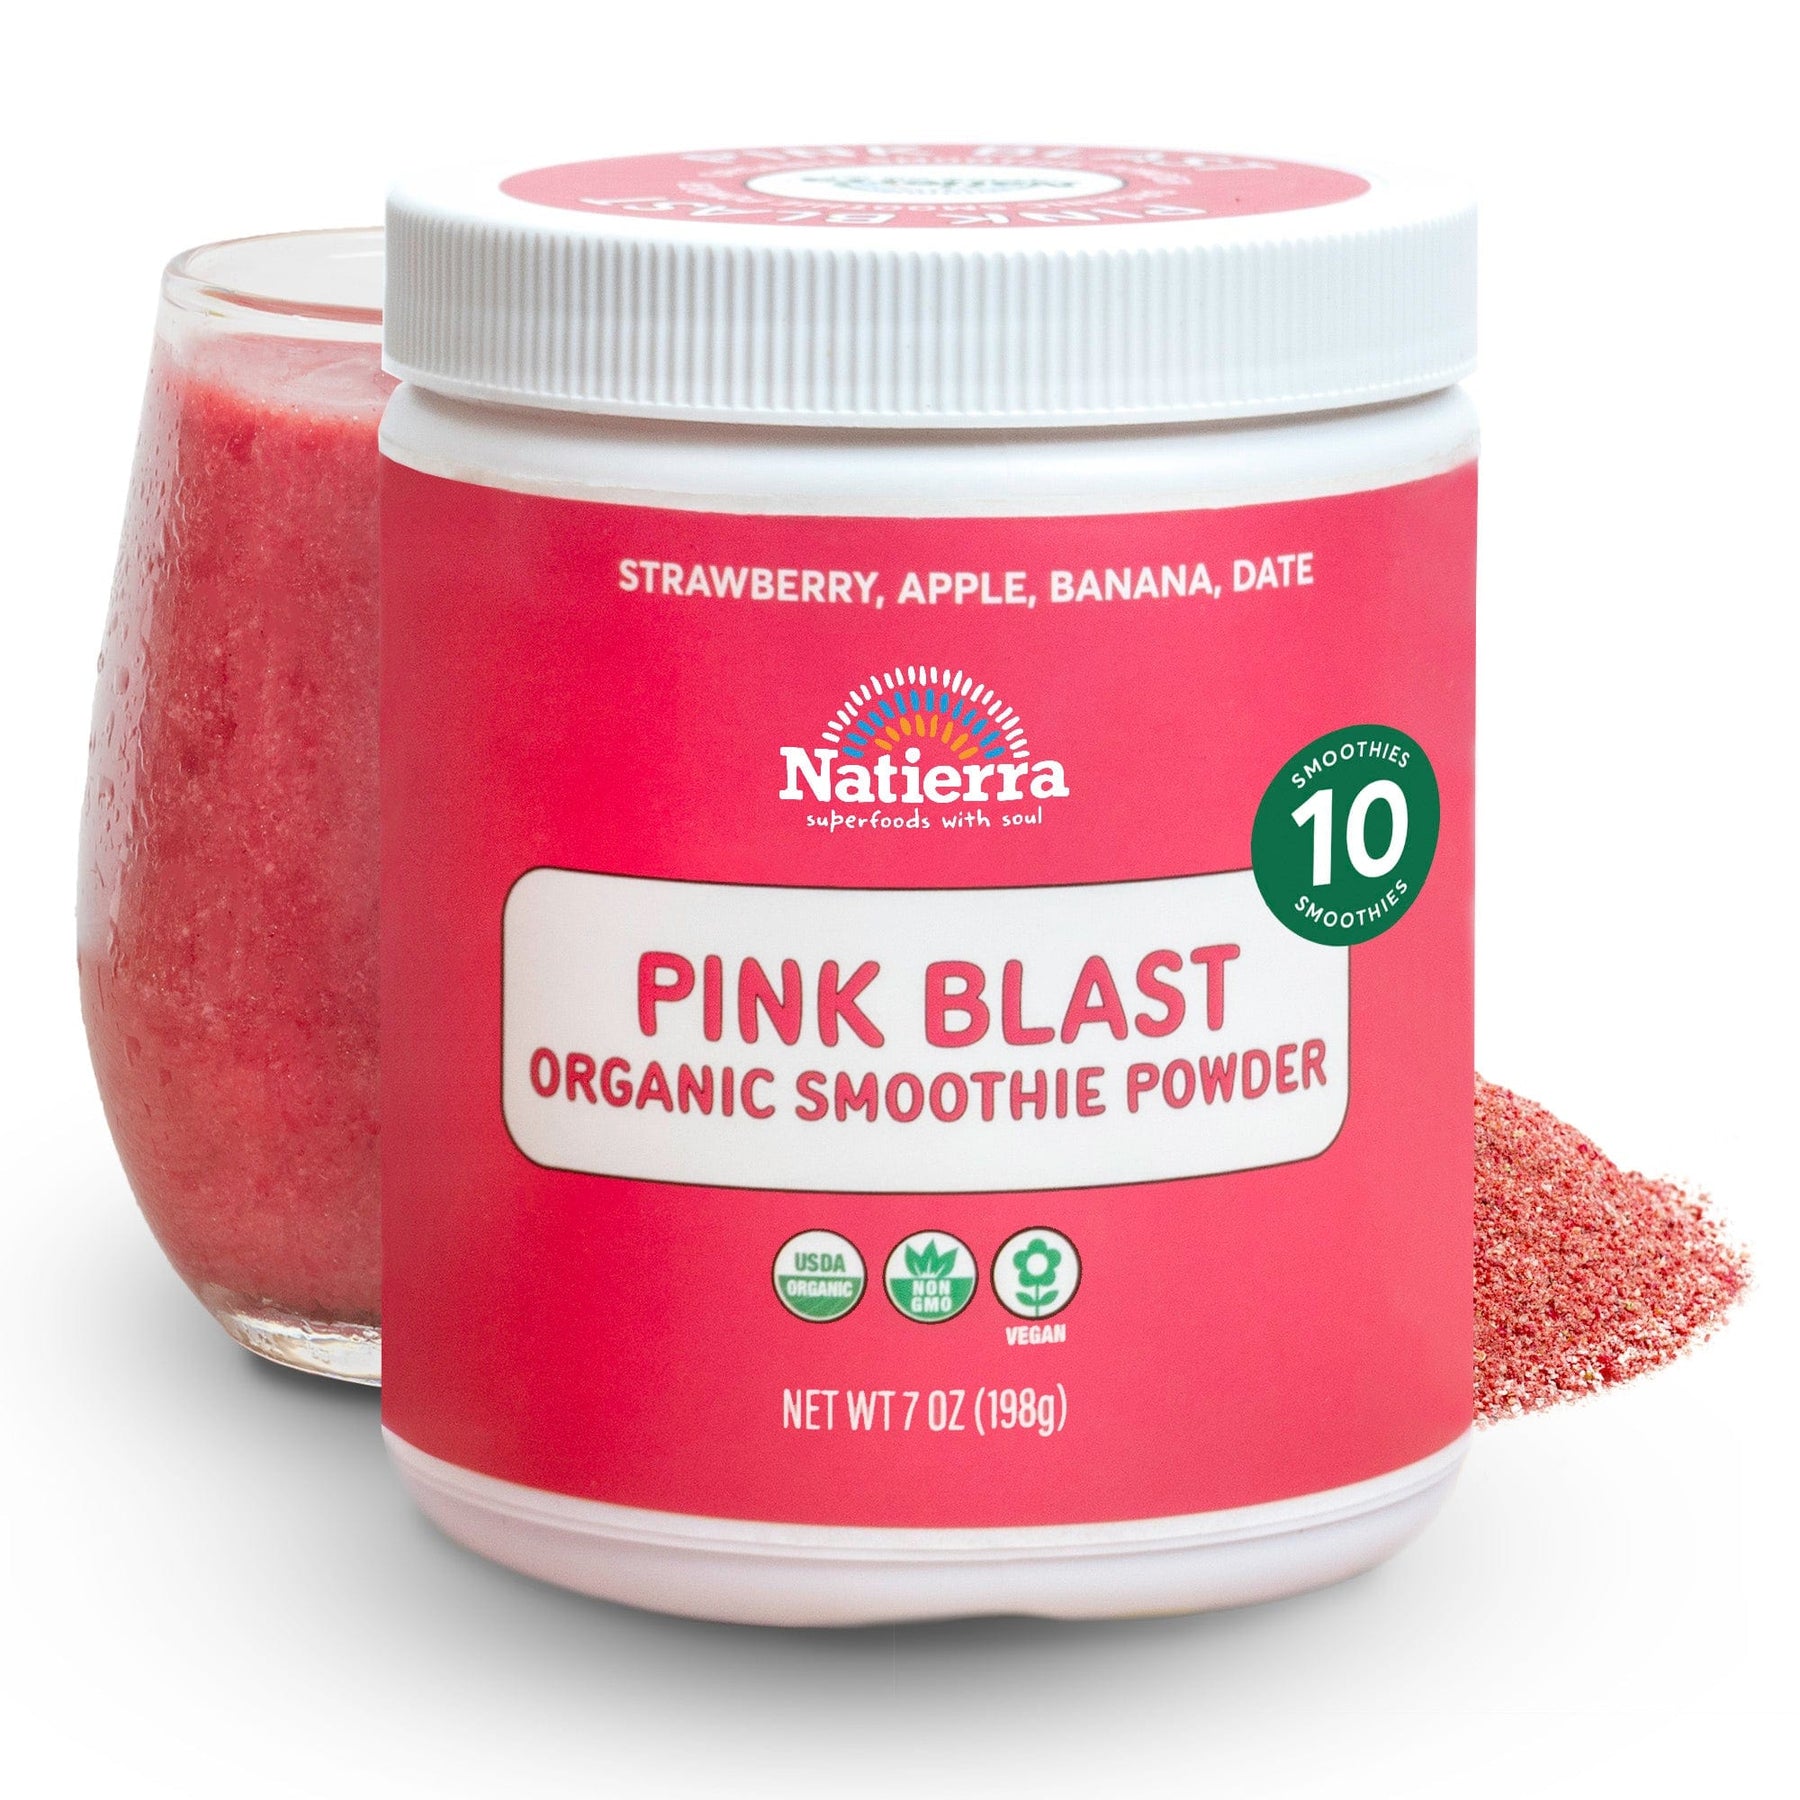 Natierra Pink Blast Organic Smoothie jar with glass and powder in the background